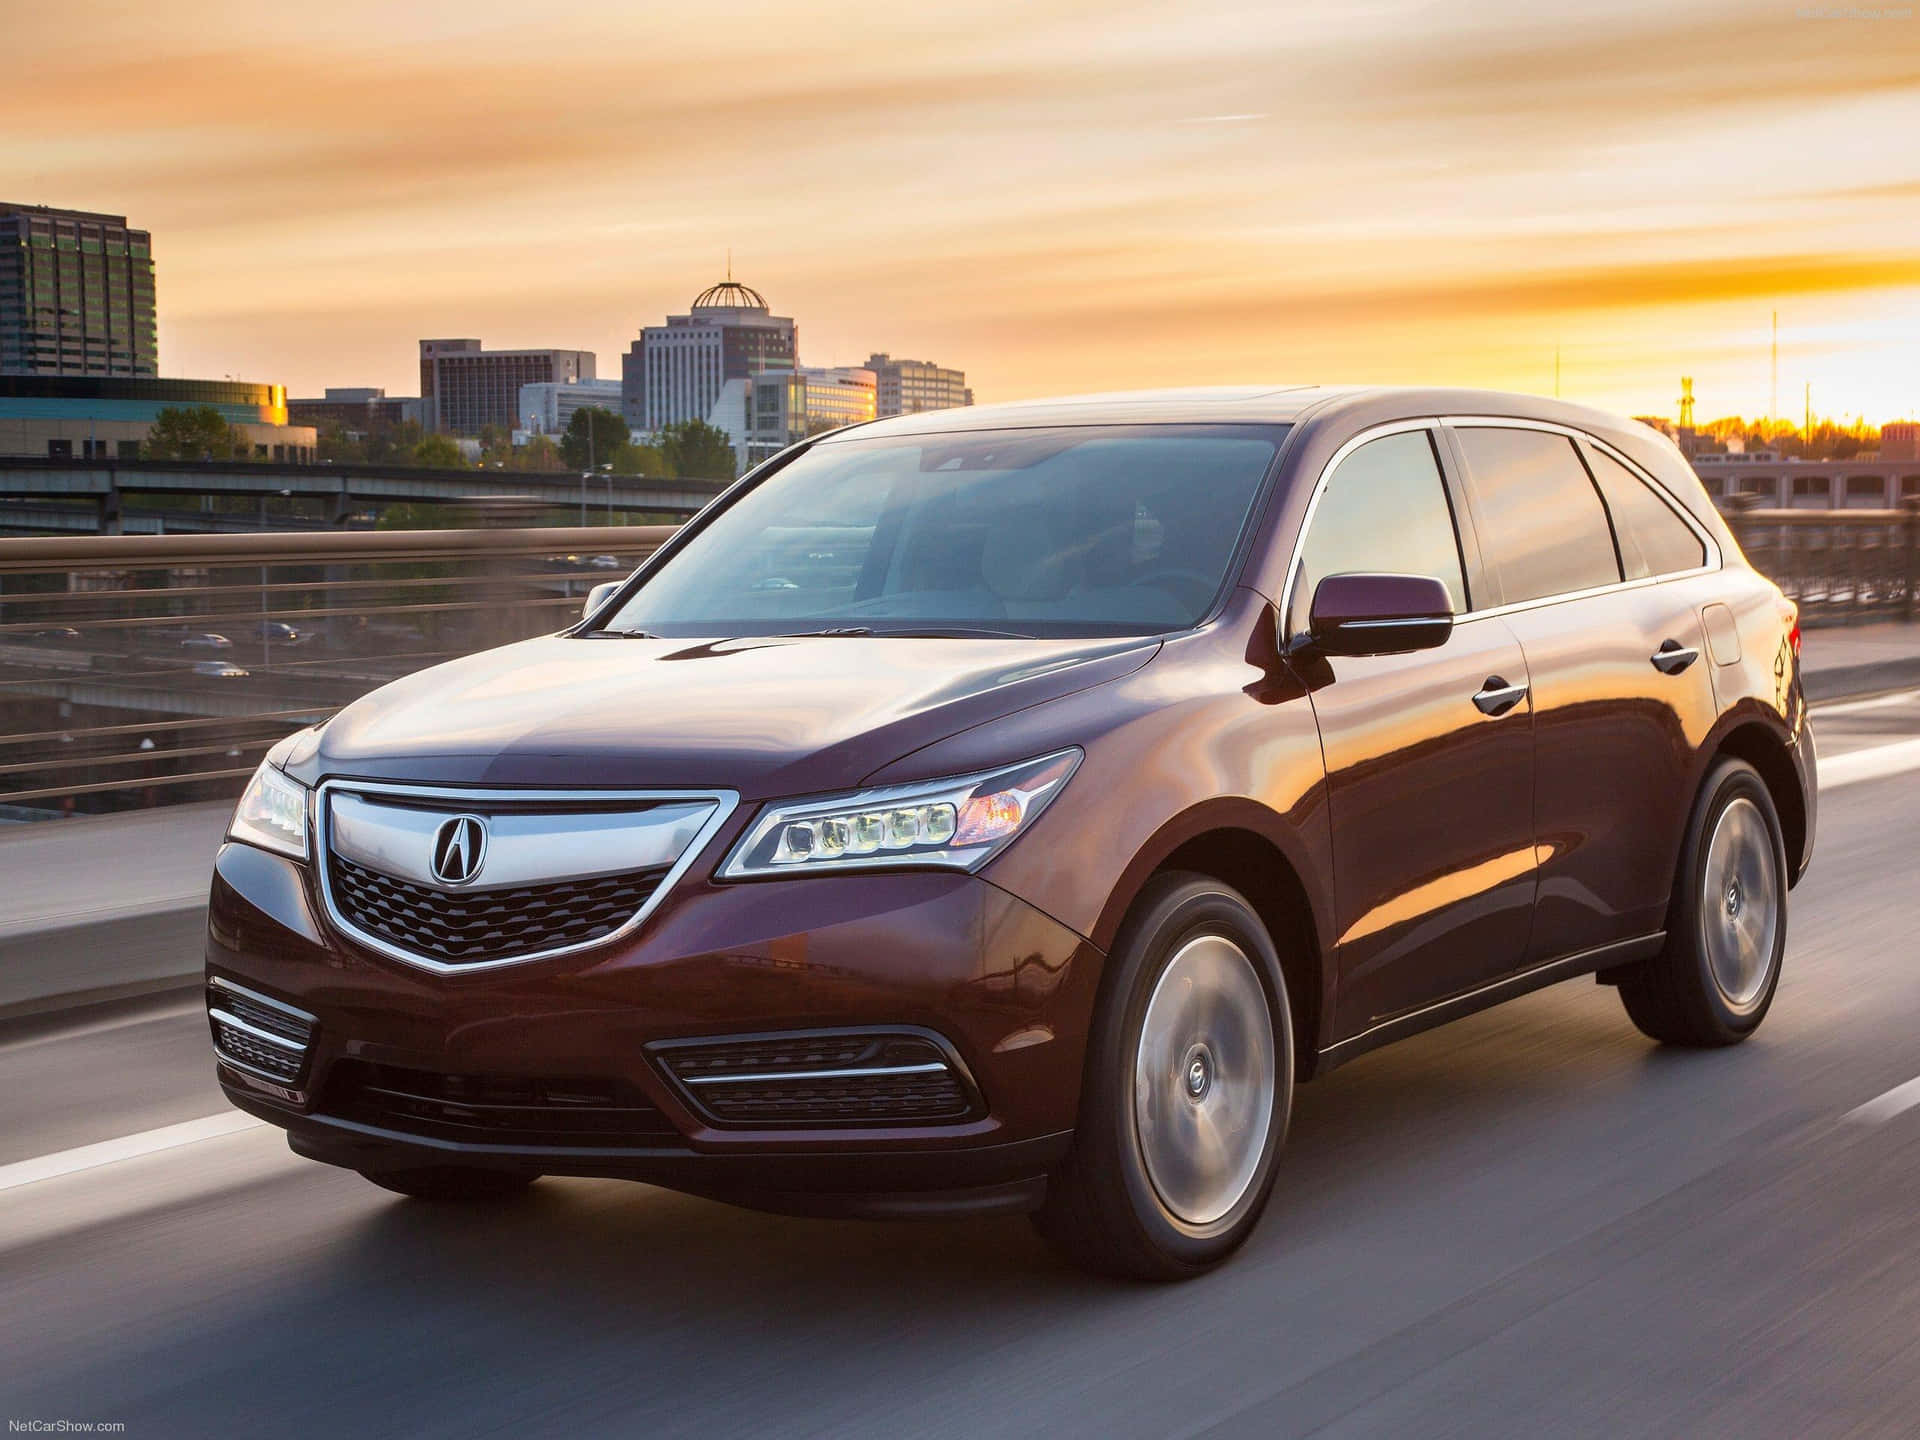 Dynamic Acura MDX in Action Wallpaper